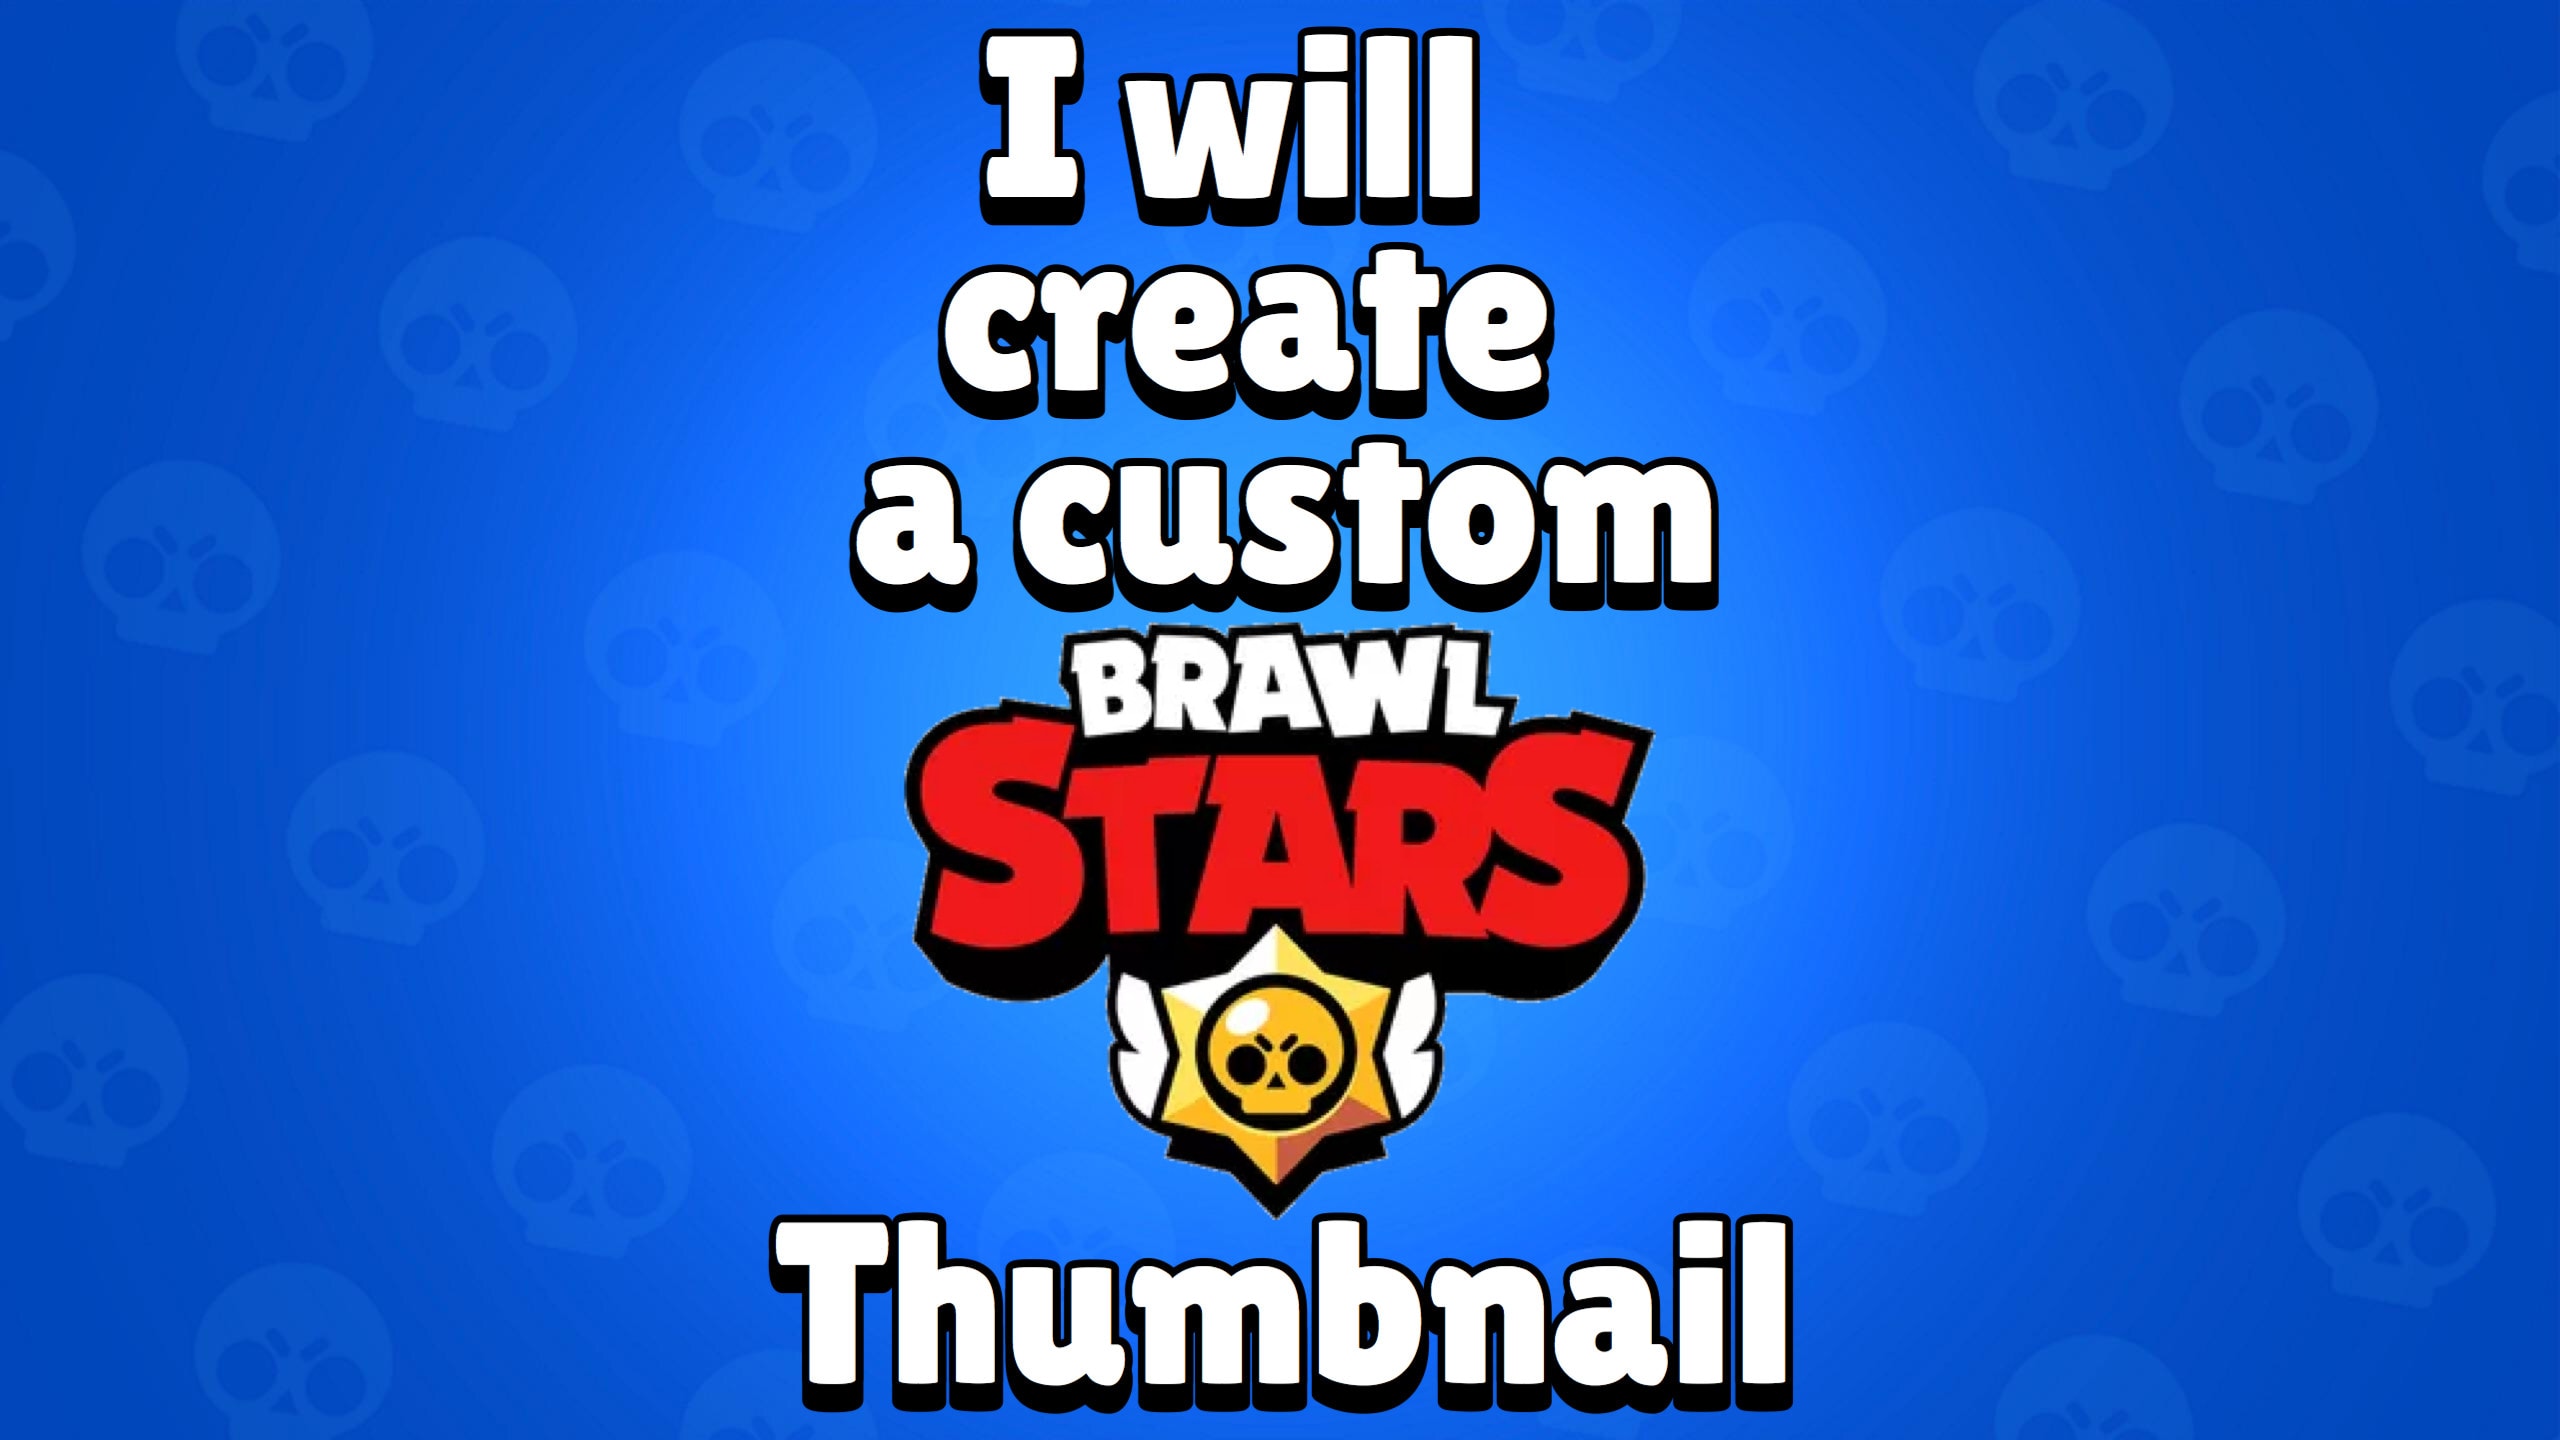 Create A Brawl Stars Thumbnail For Your Yt Video By Jo7186 Fiverr - brawl stars image 2560x1440